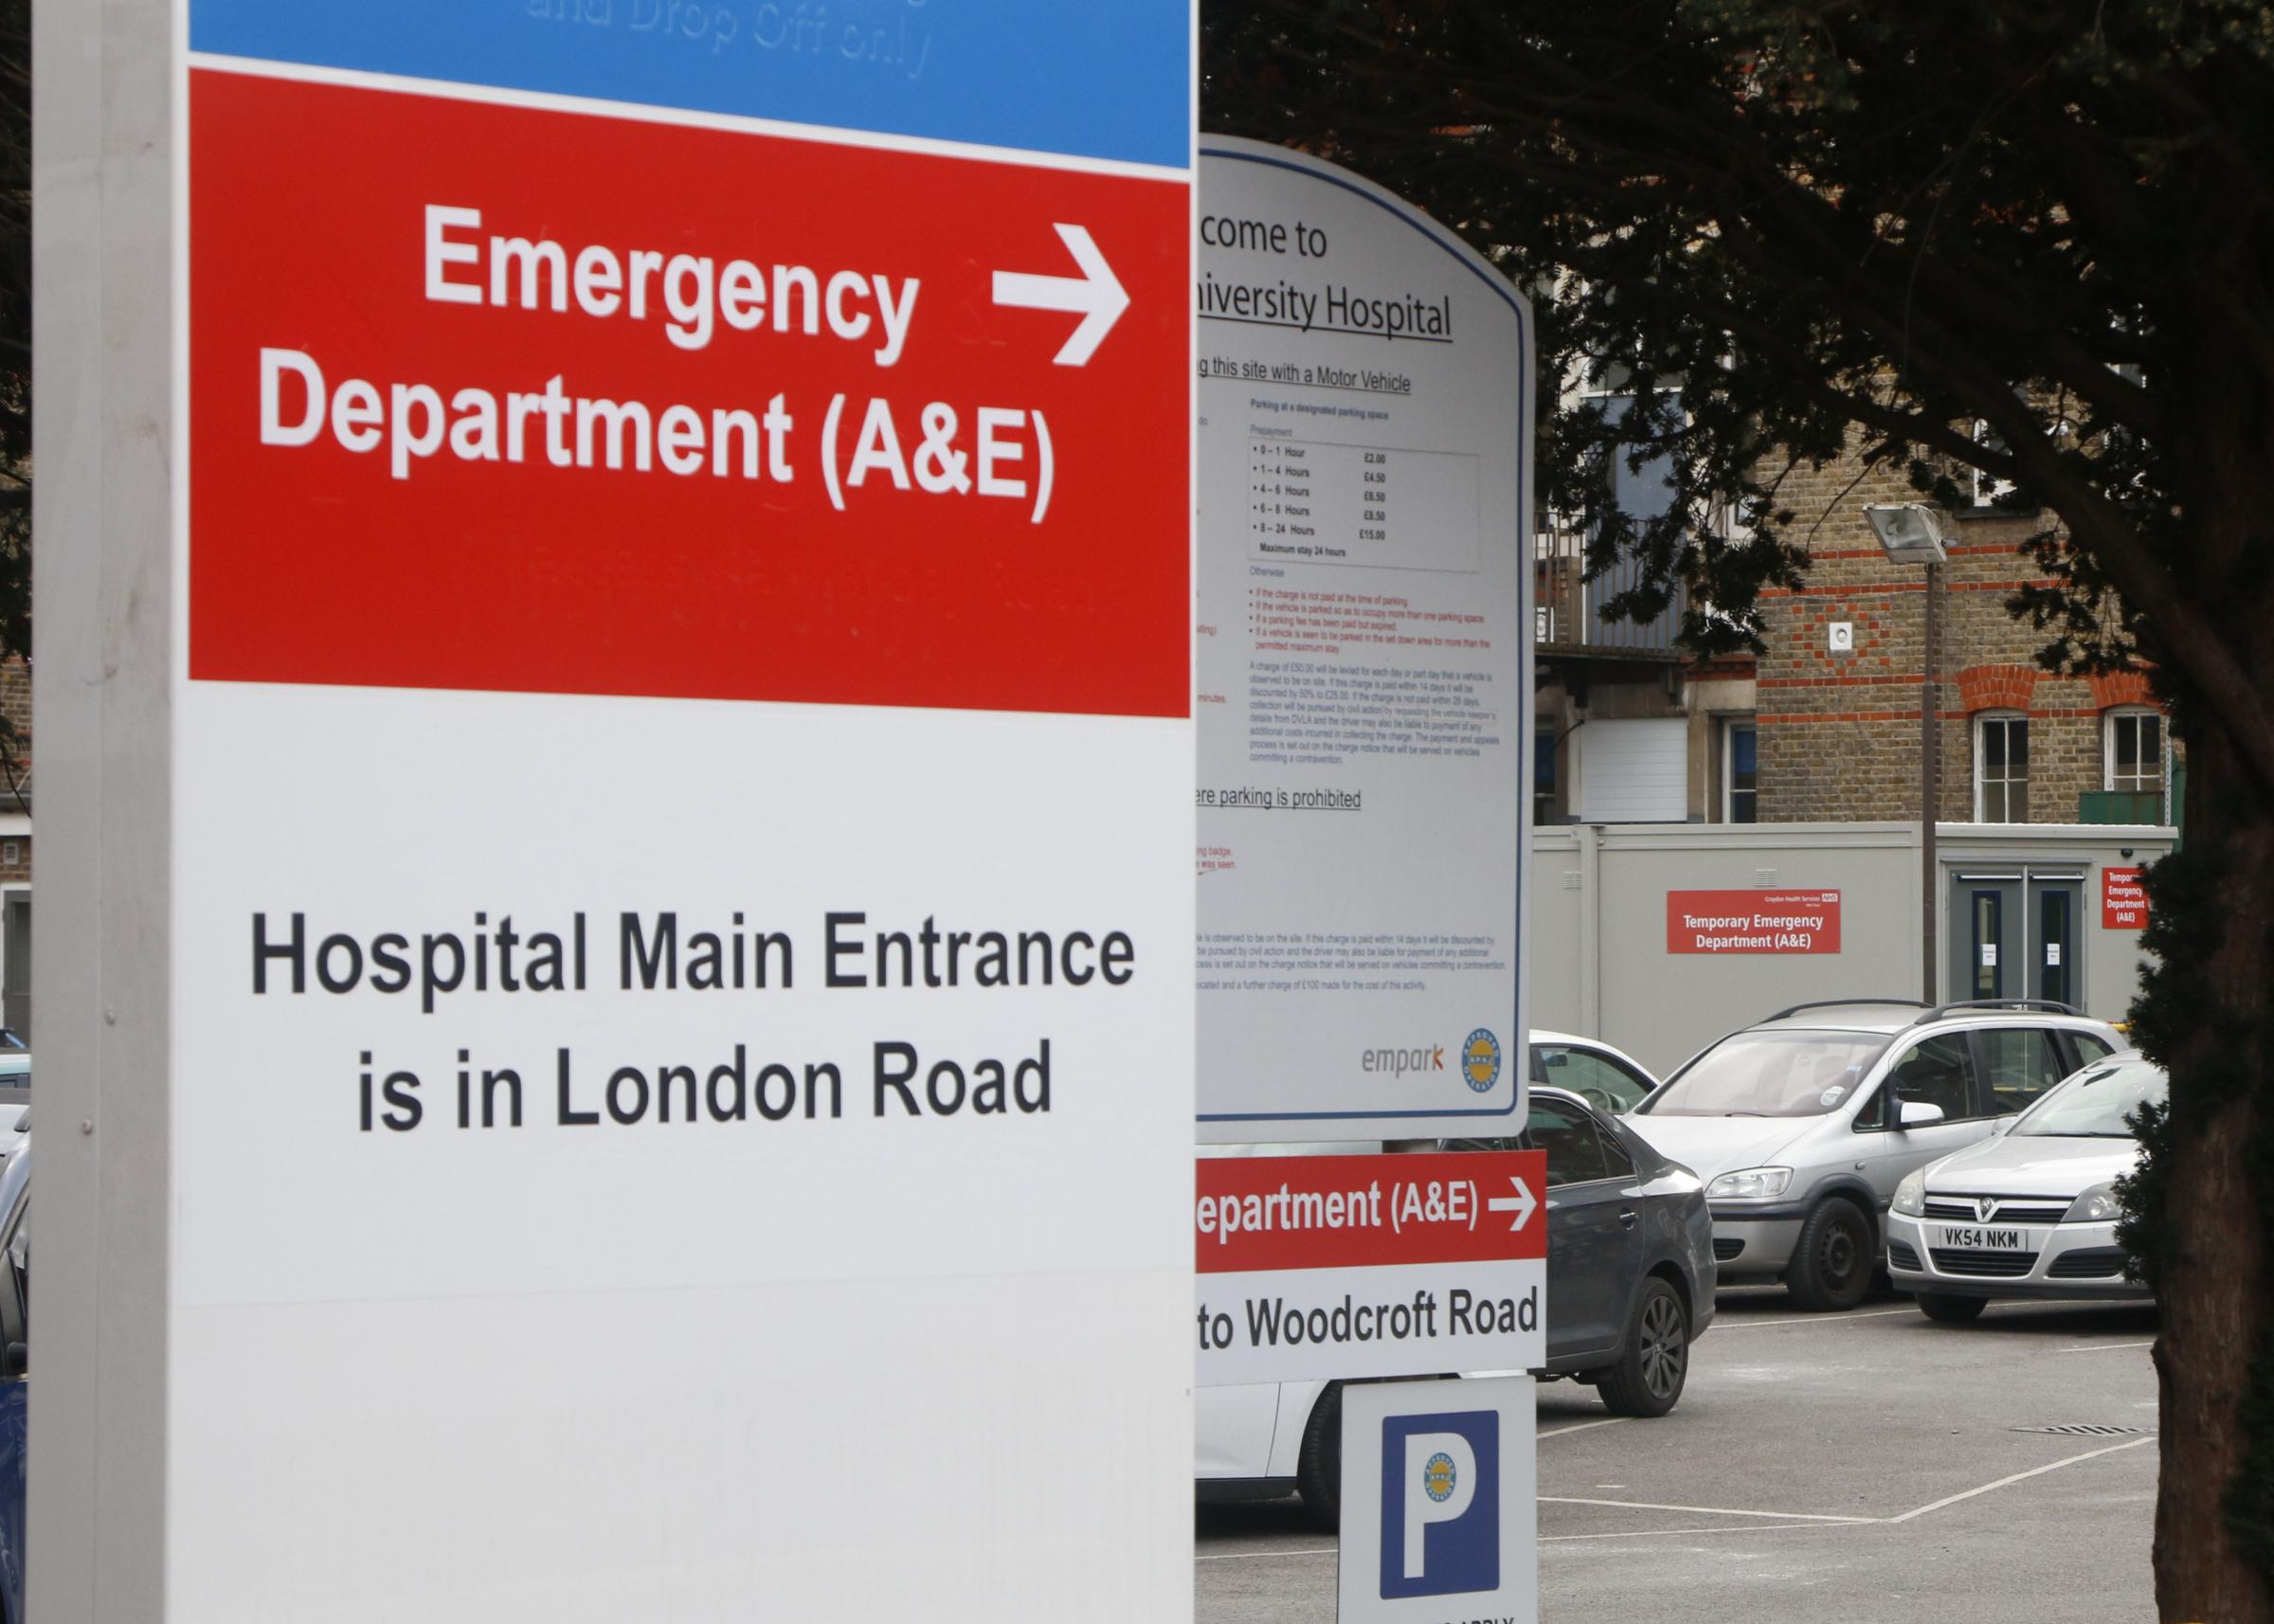 Ambulances redirected from Croydon University Hospital for the second time this month